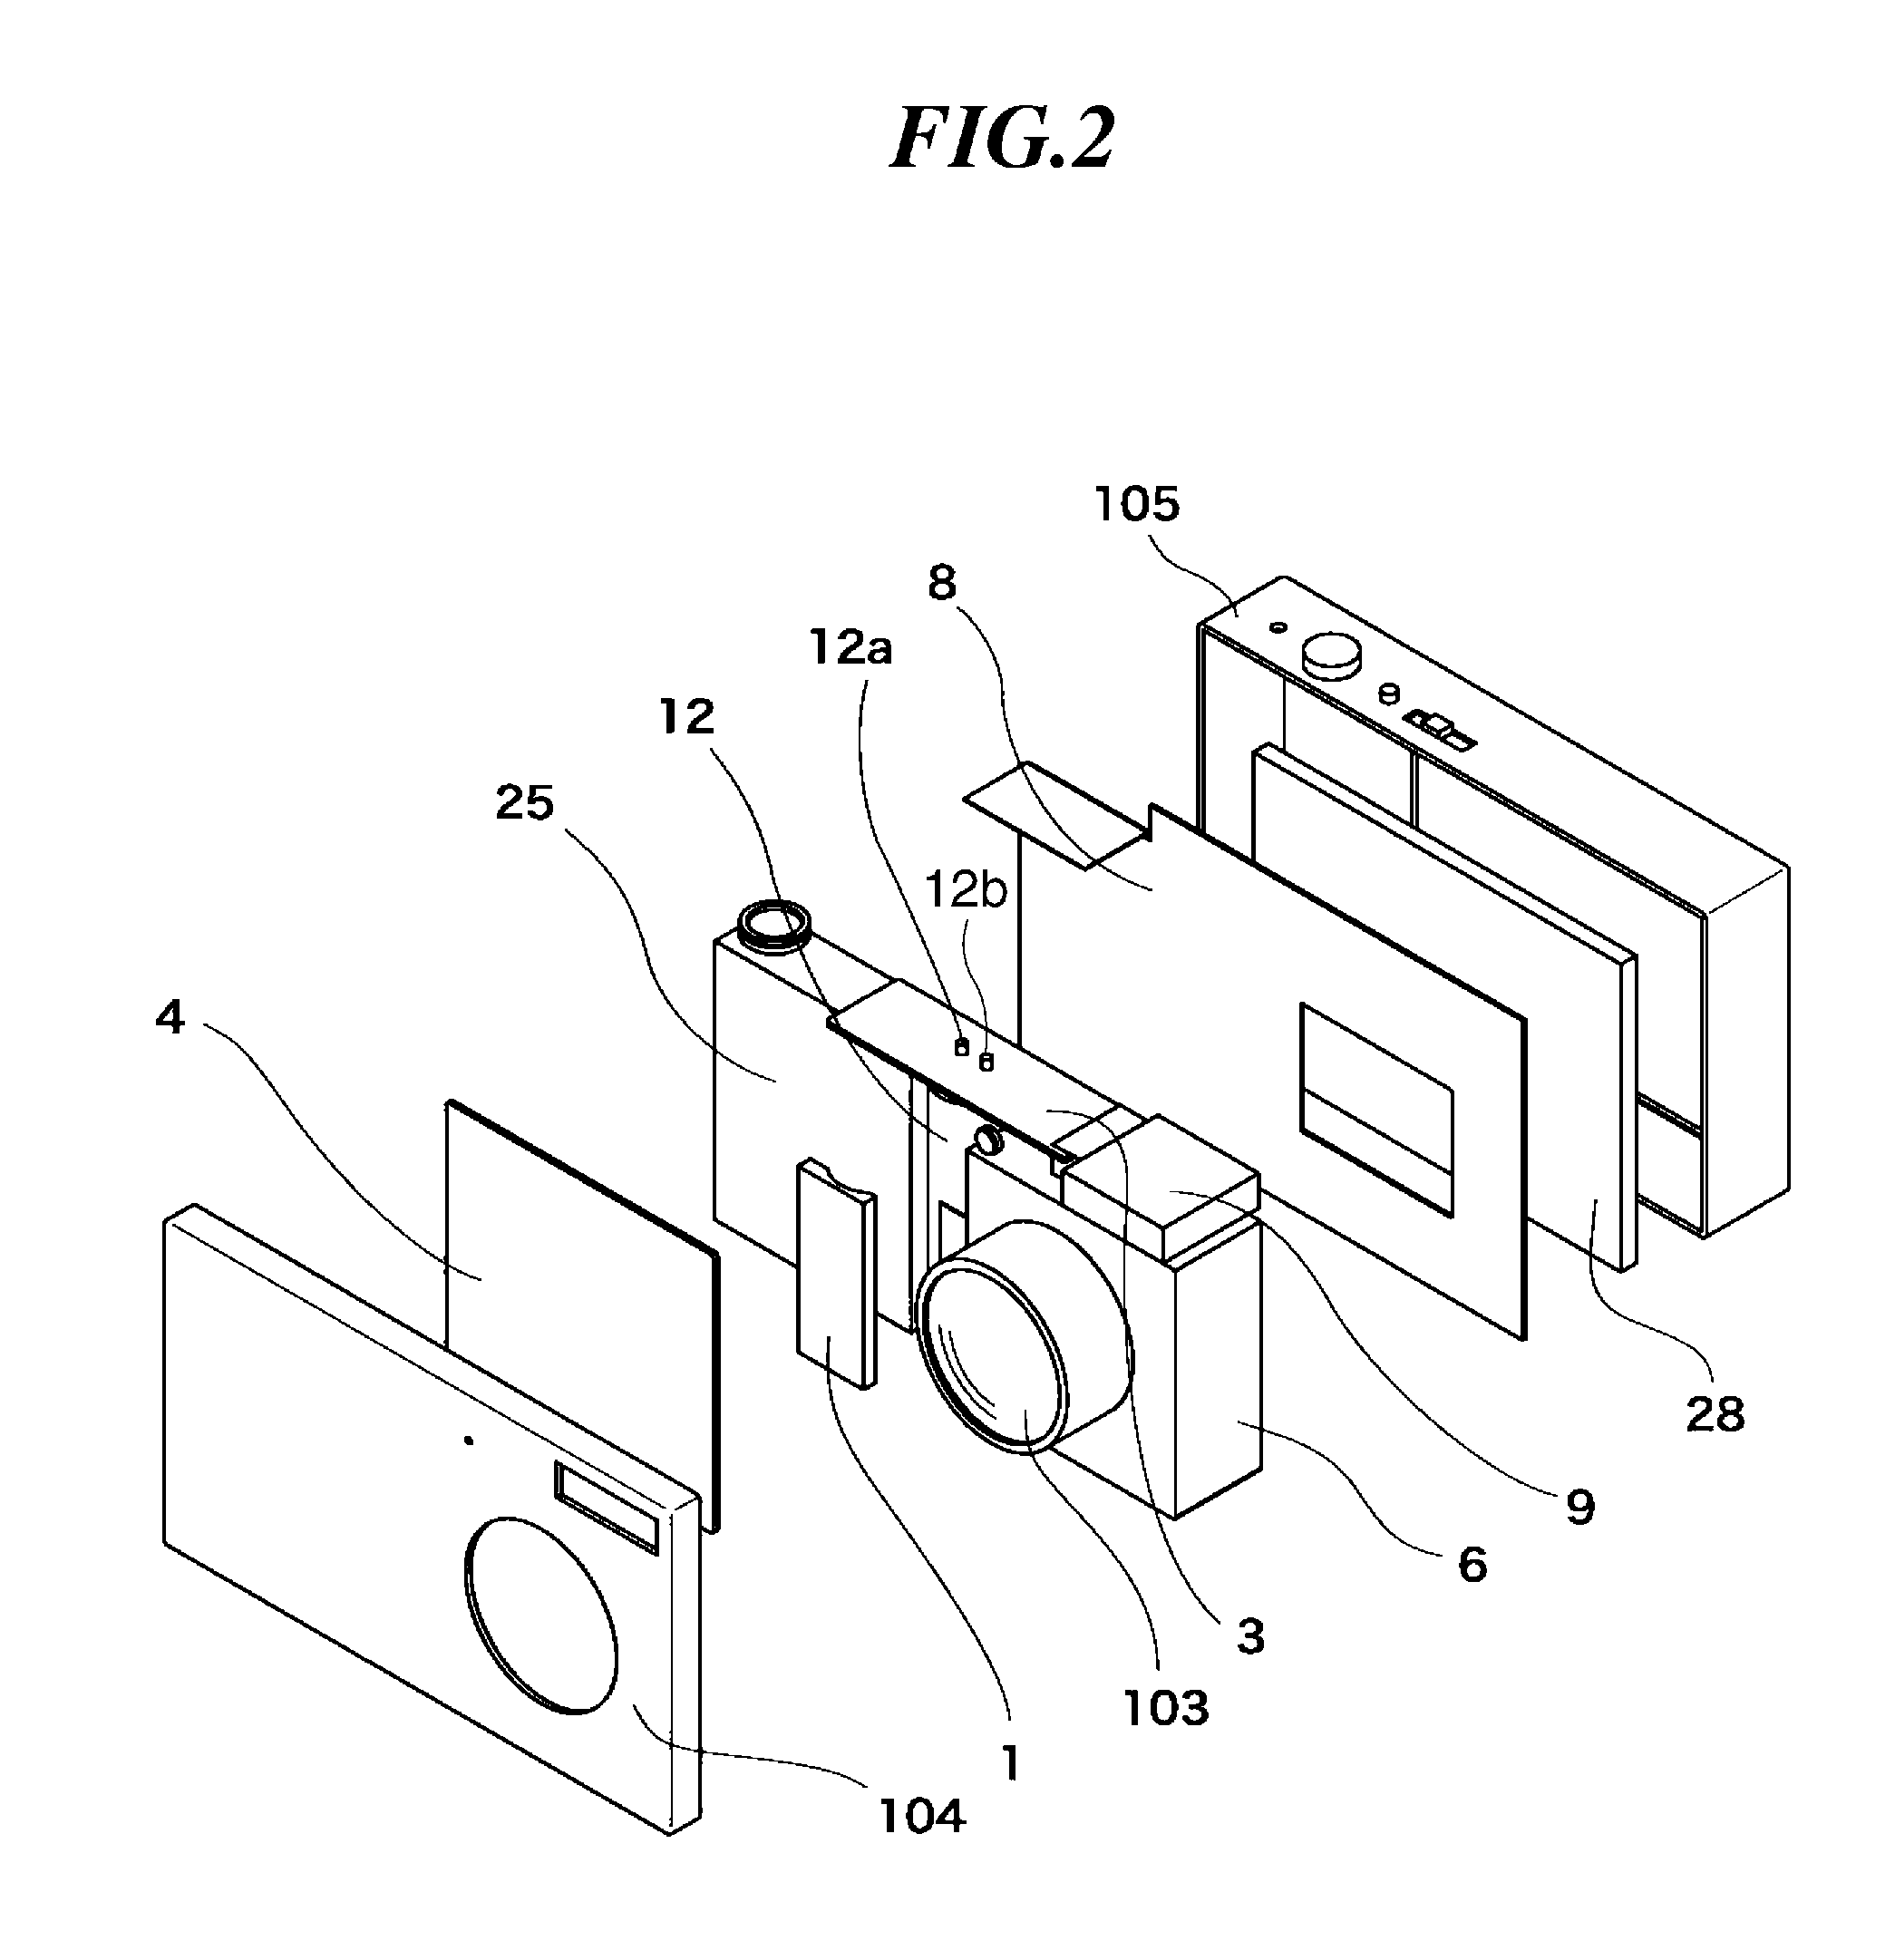 Image pickup apparatus capable of efficiently dissipating heat